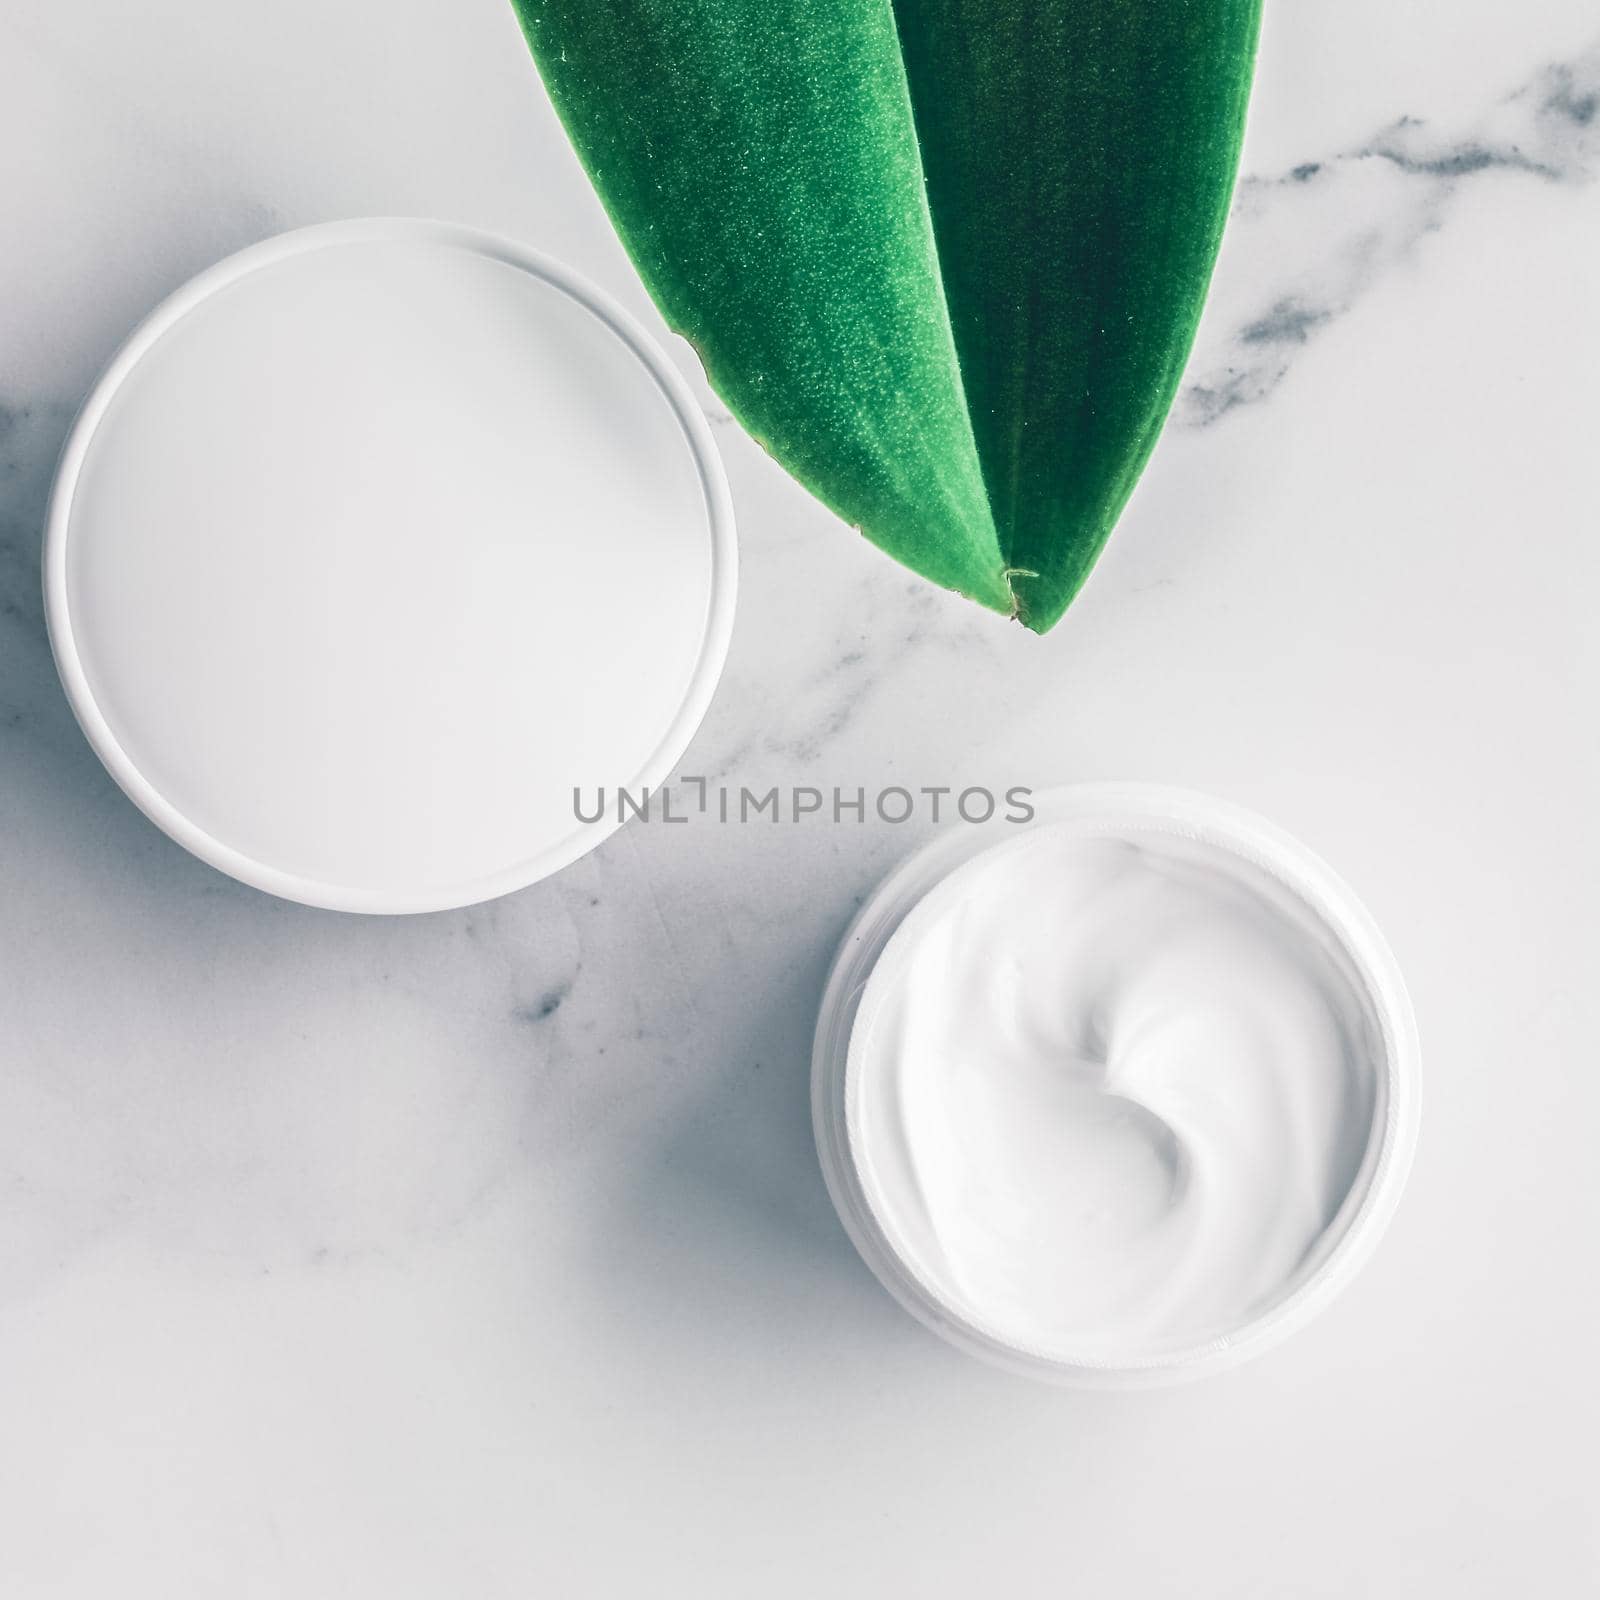 Skincare and body care, luxury spa and clean products concept - organic beauty cosmetics on marble, home spa flatlay background